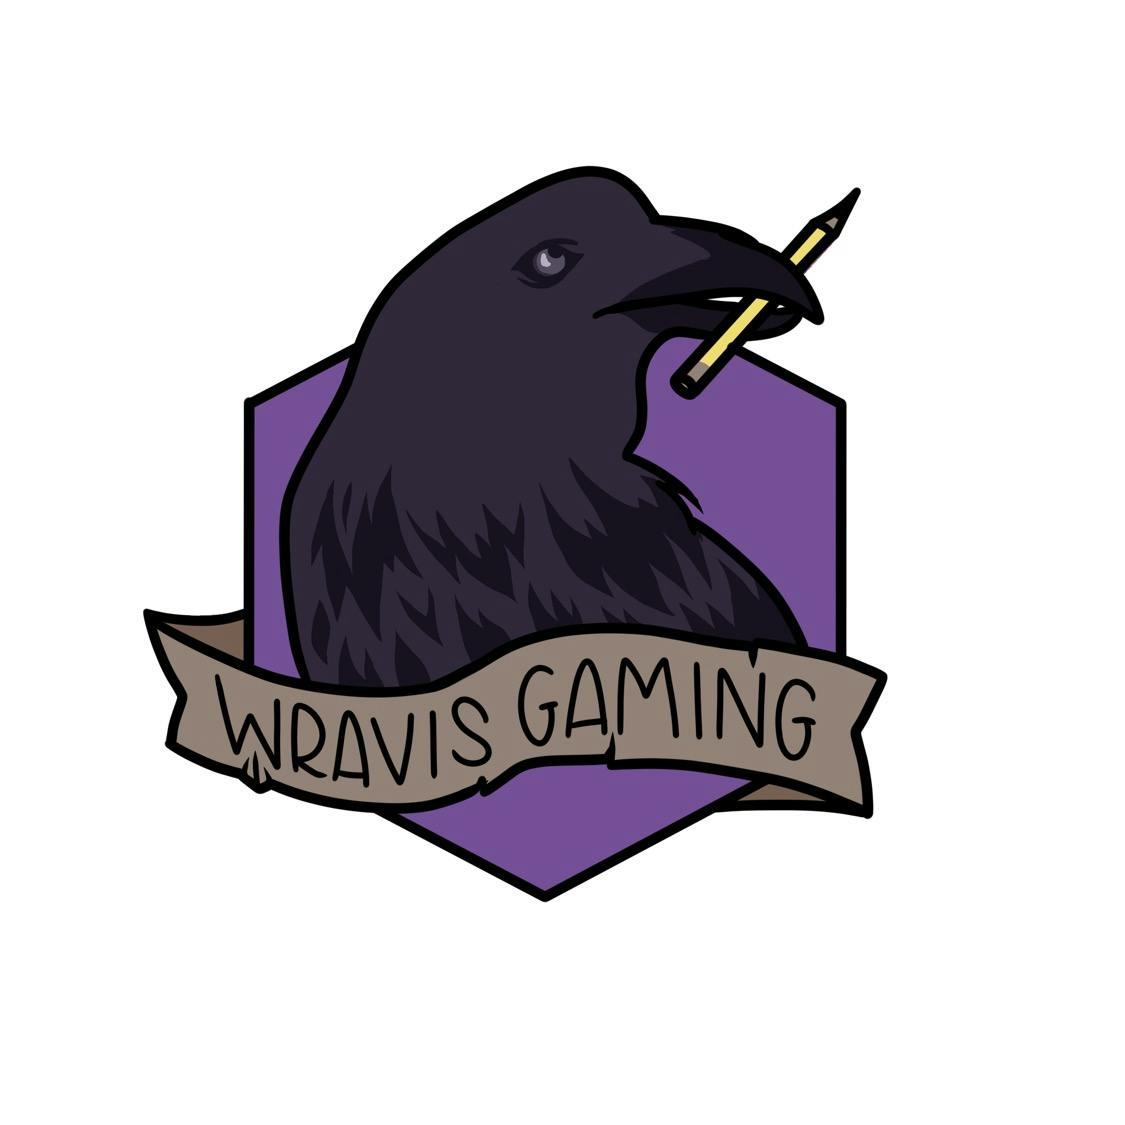 Leigh - Wravis Gaming